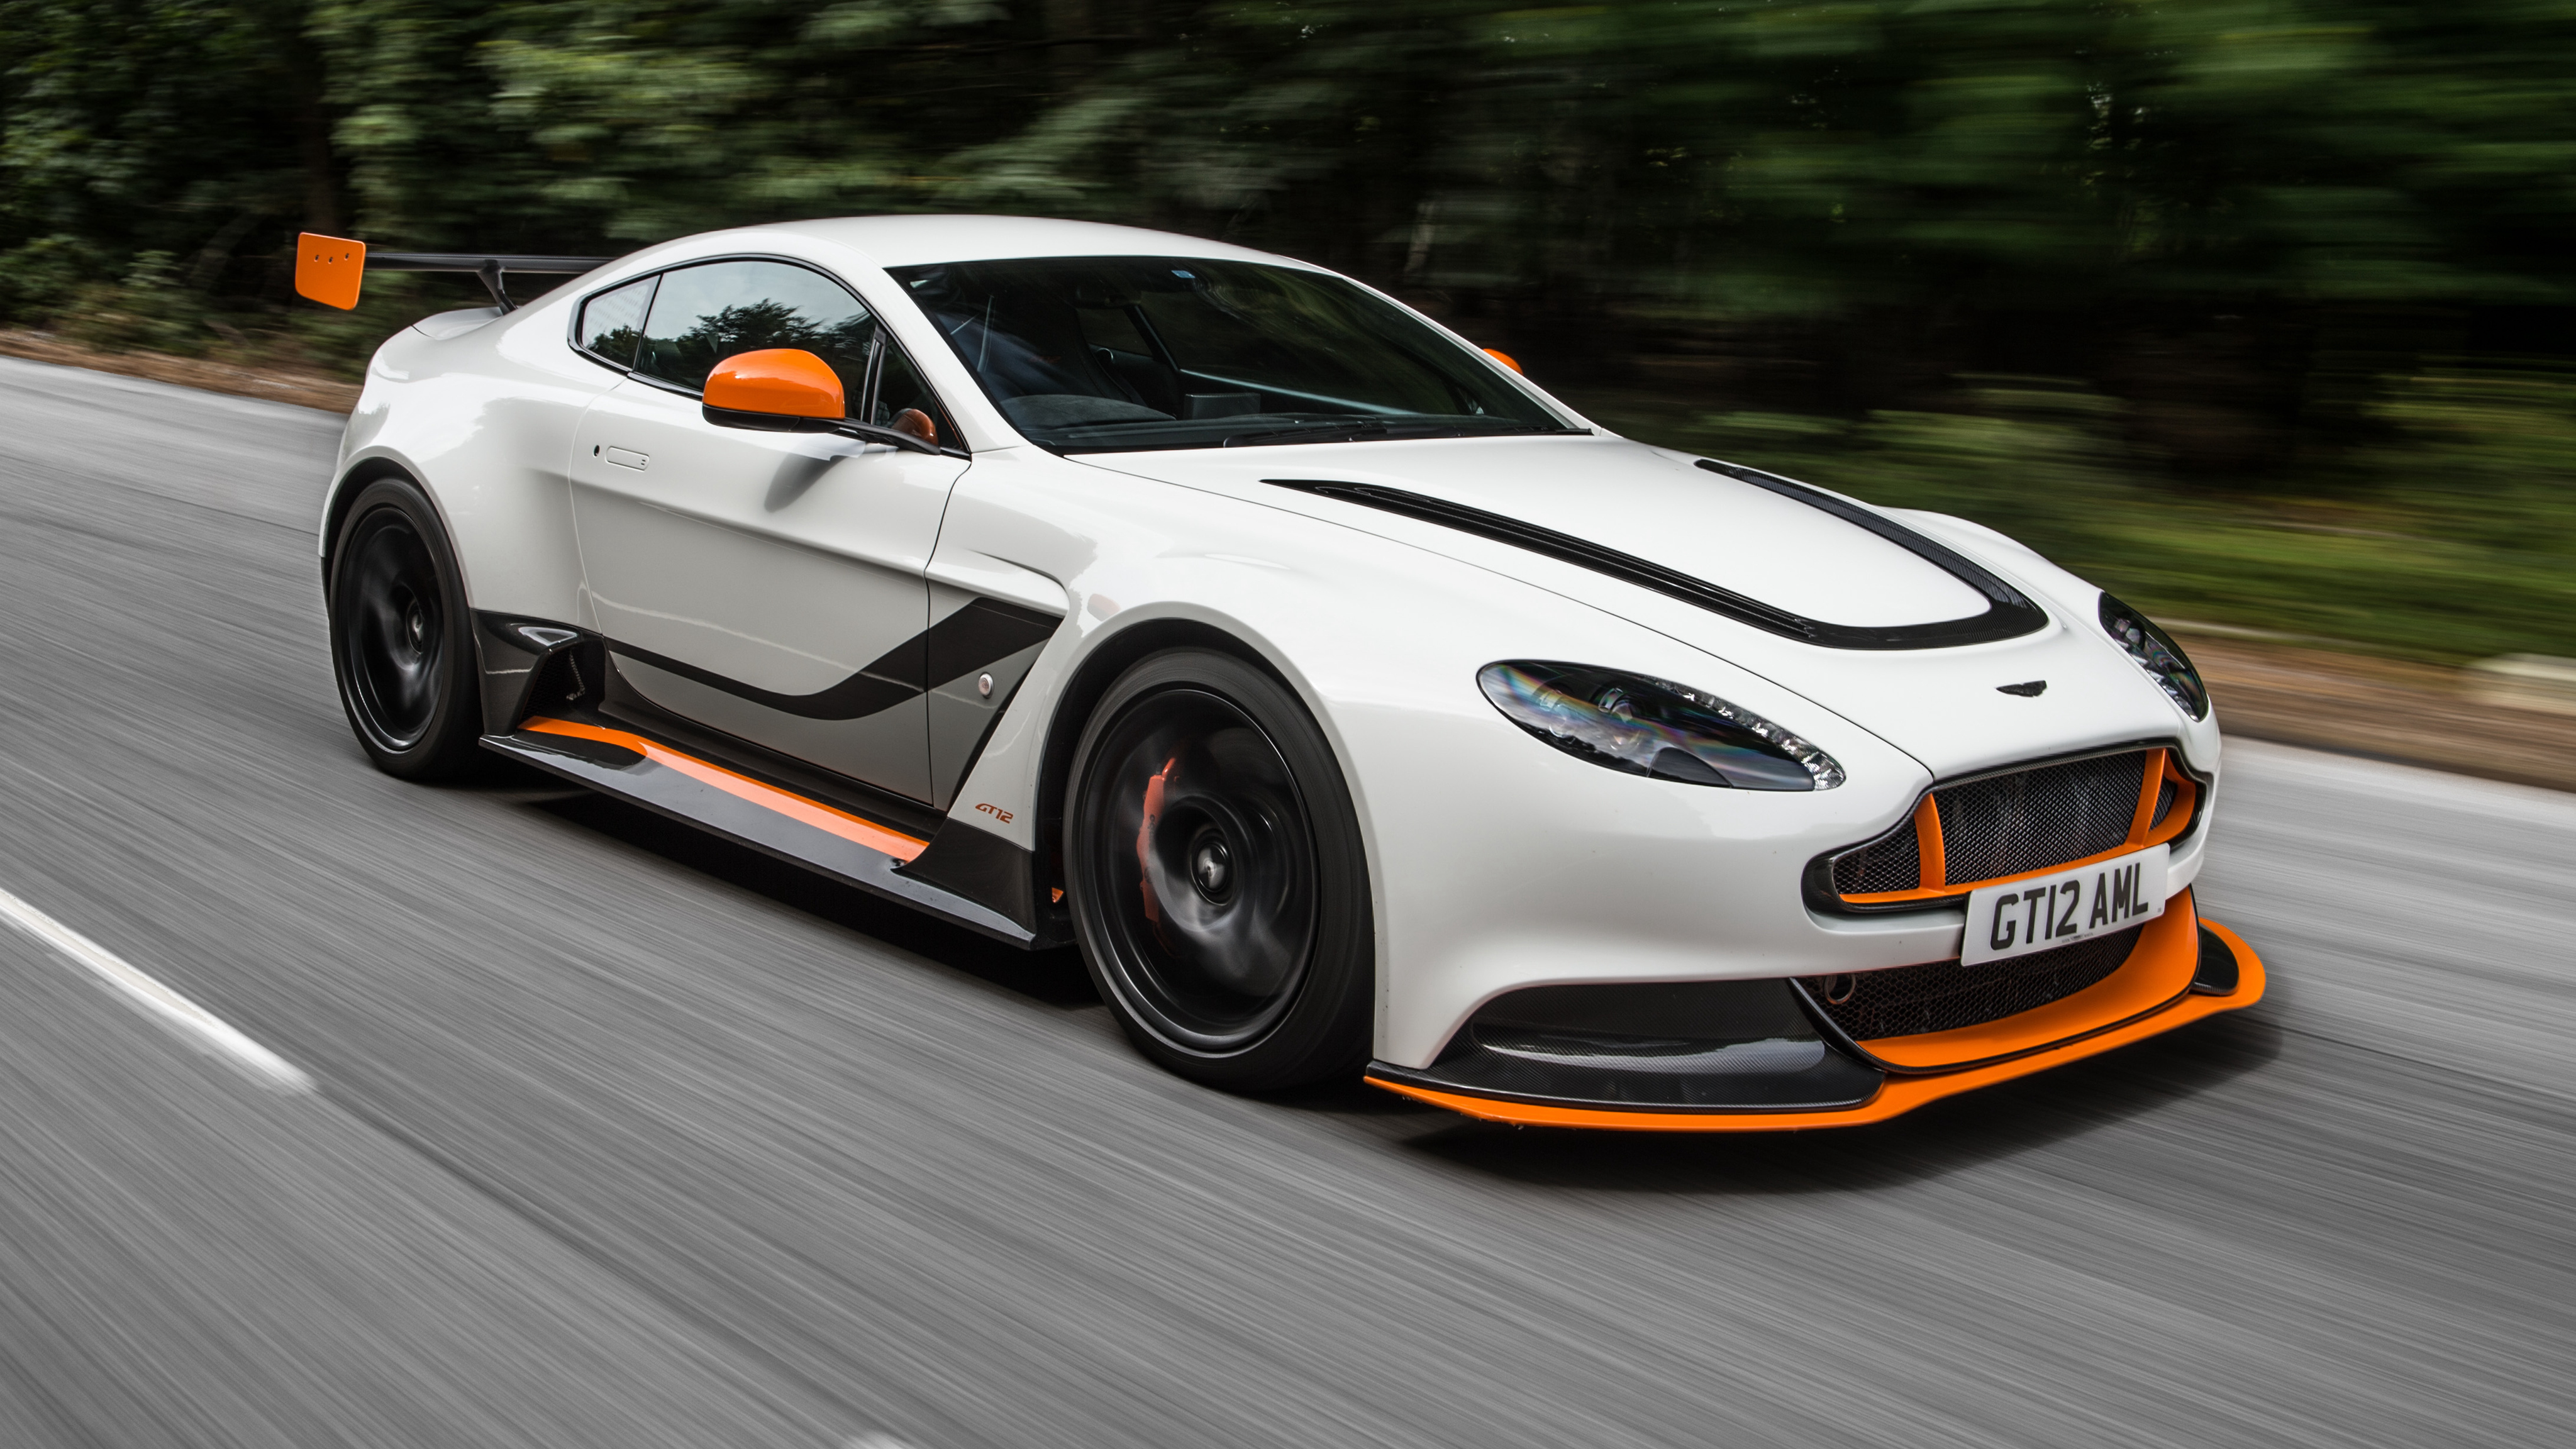 136205 Screensavers and Wallpapers Movement for phone. Download aston martin, cars, traffic, movement, side view, vantage pictures for free